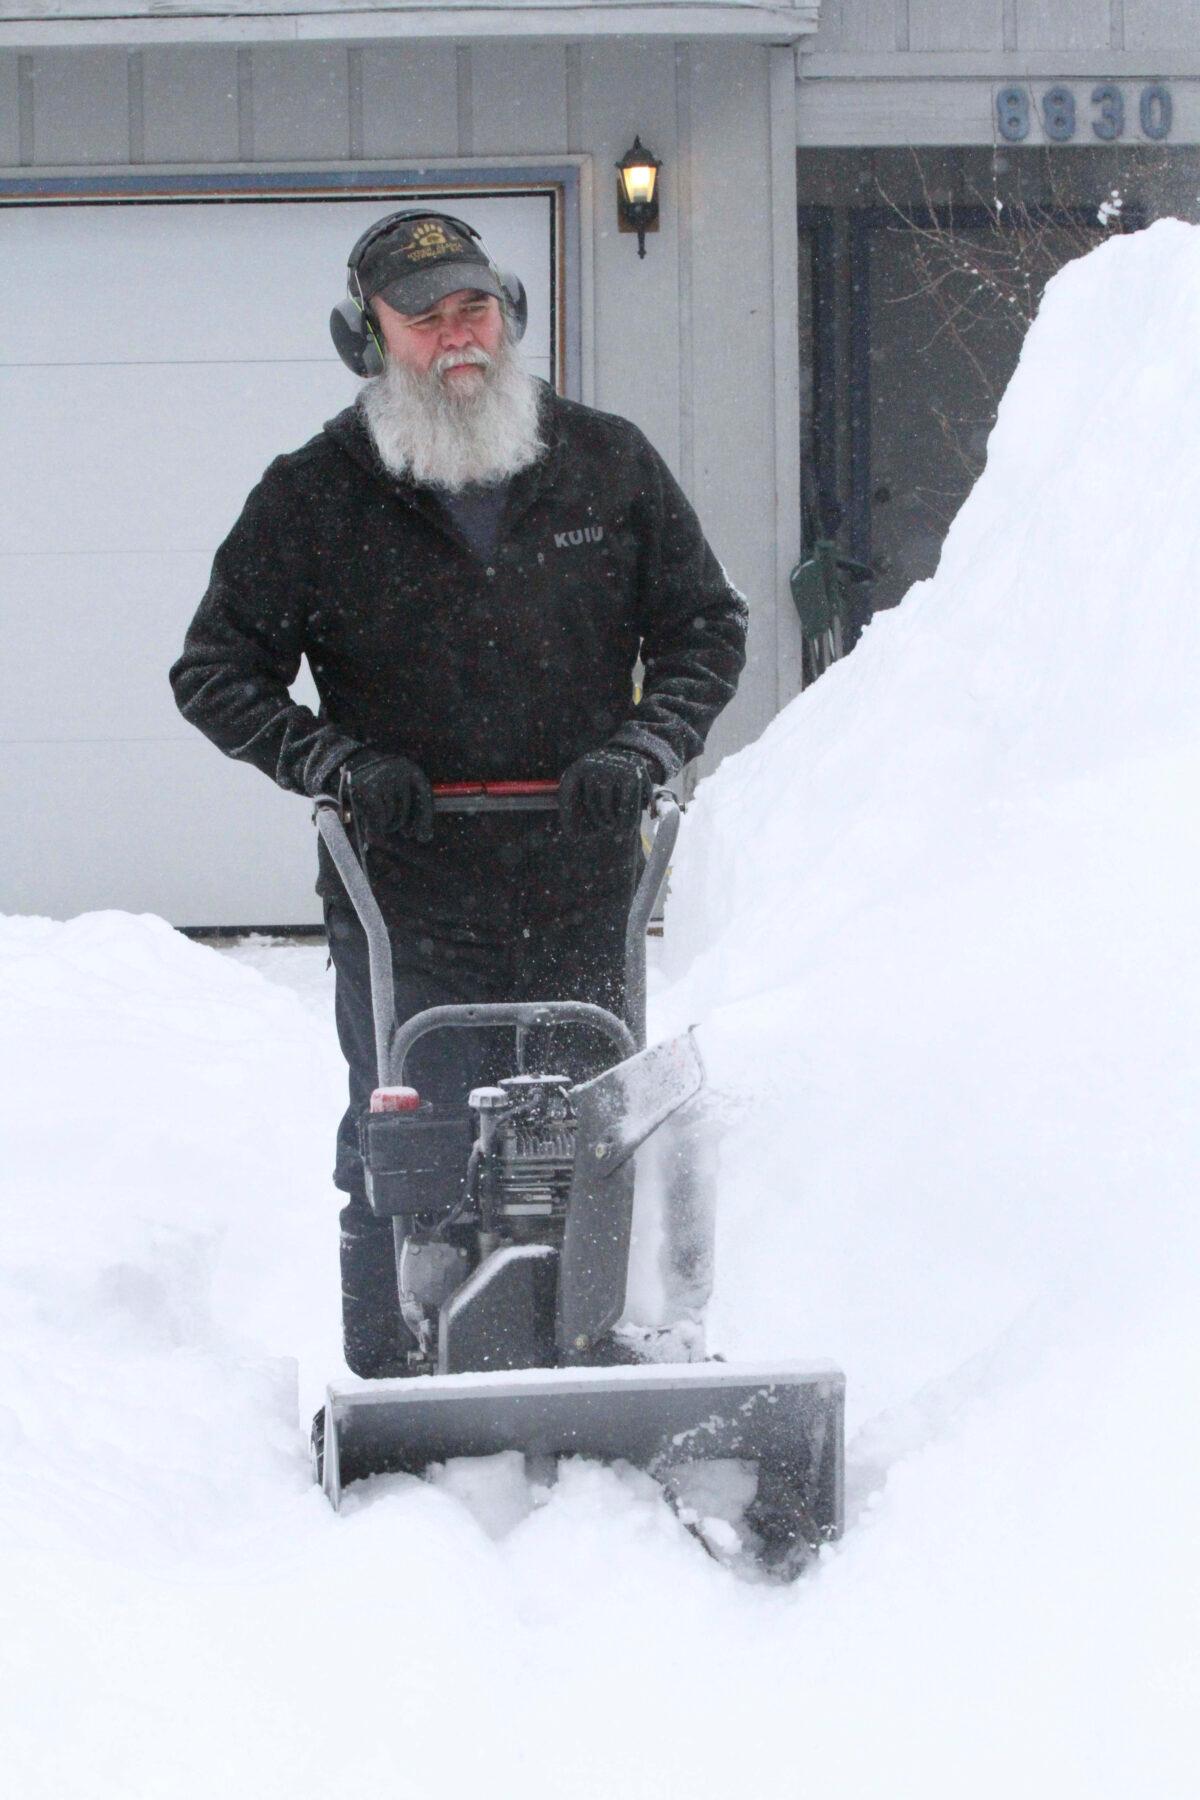 Dirk Westfall operates a snowblower at his home in Anchorage, Alaska, on March 11, 2021. (Mark Thiessen/AP Photo)